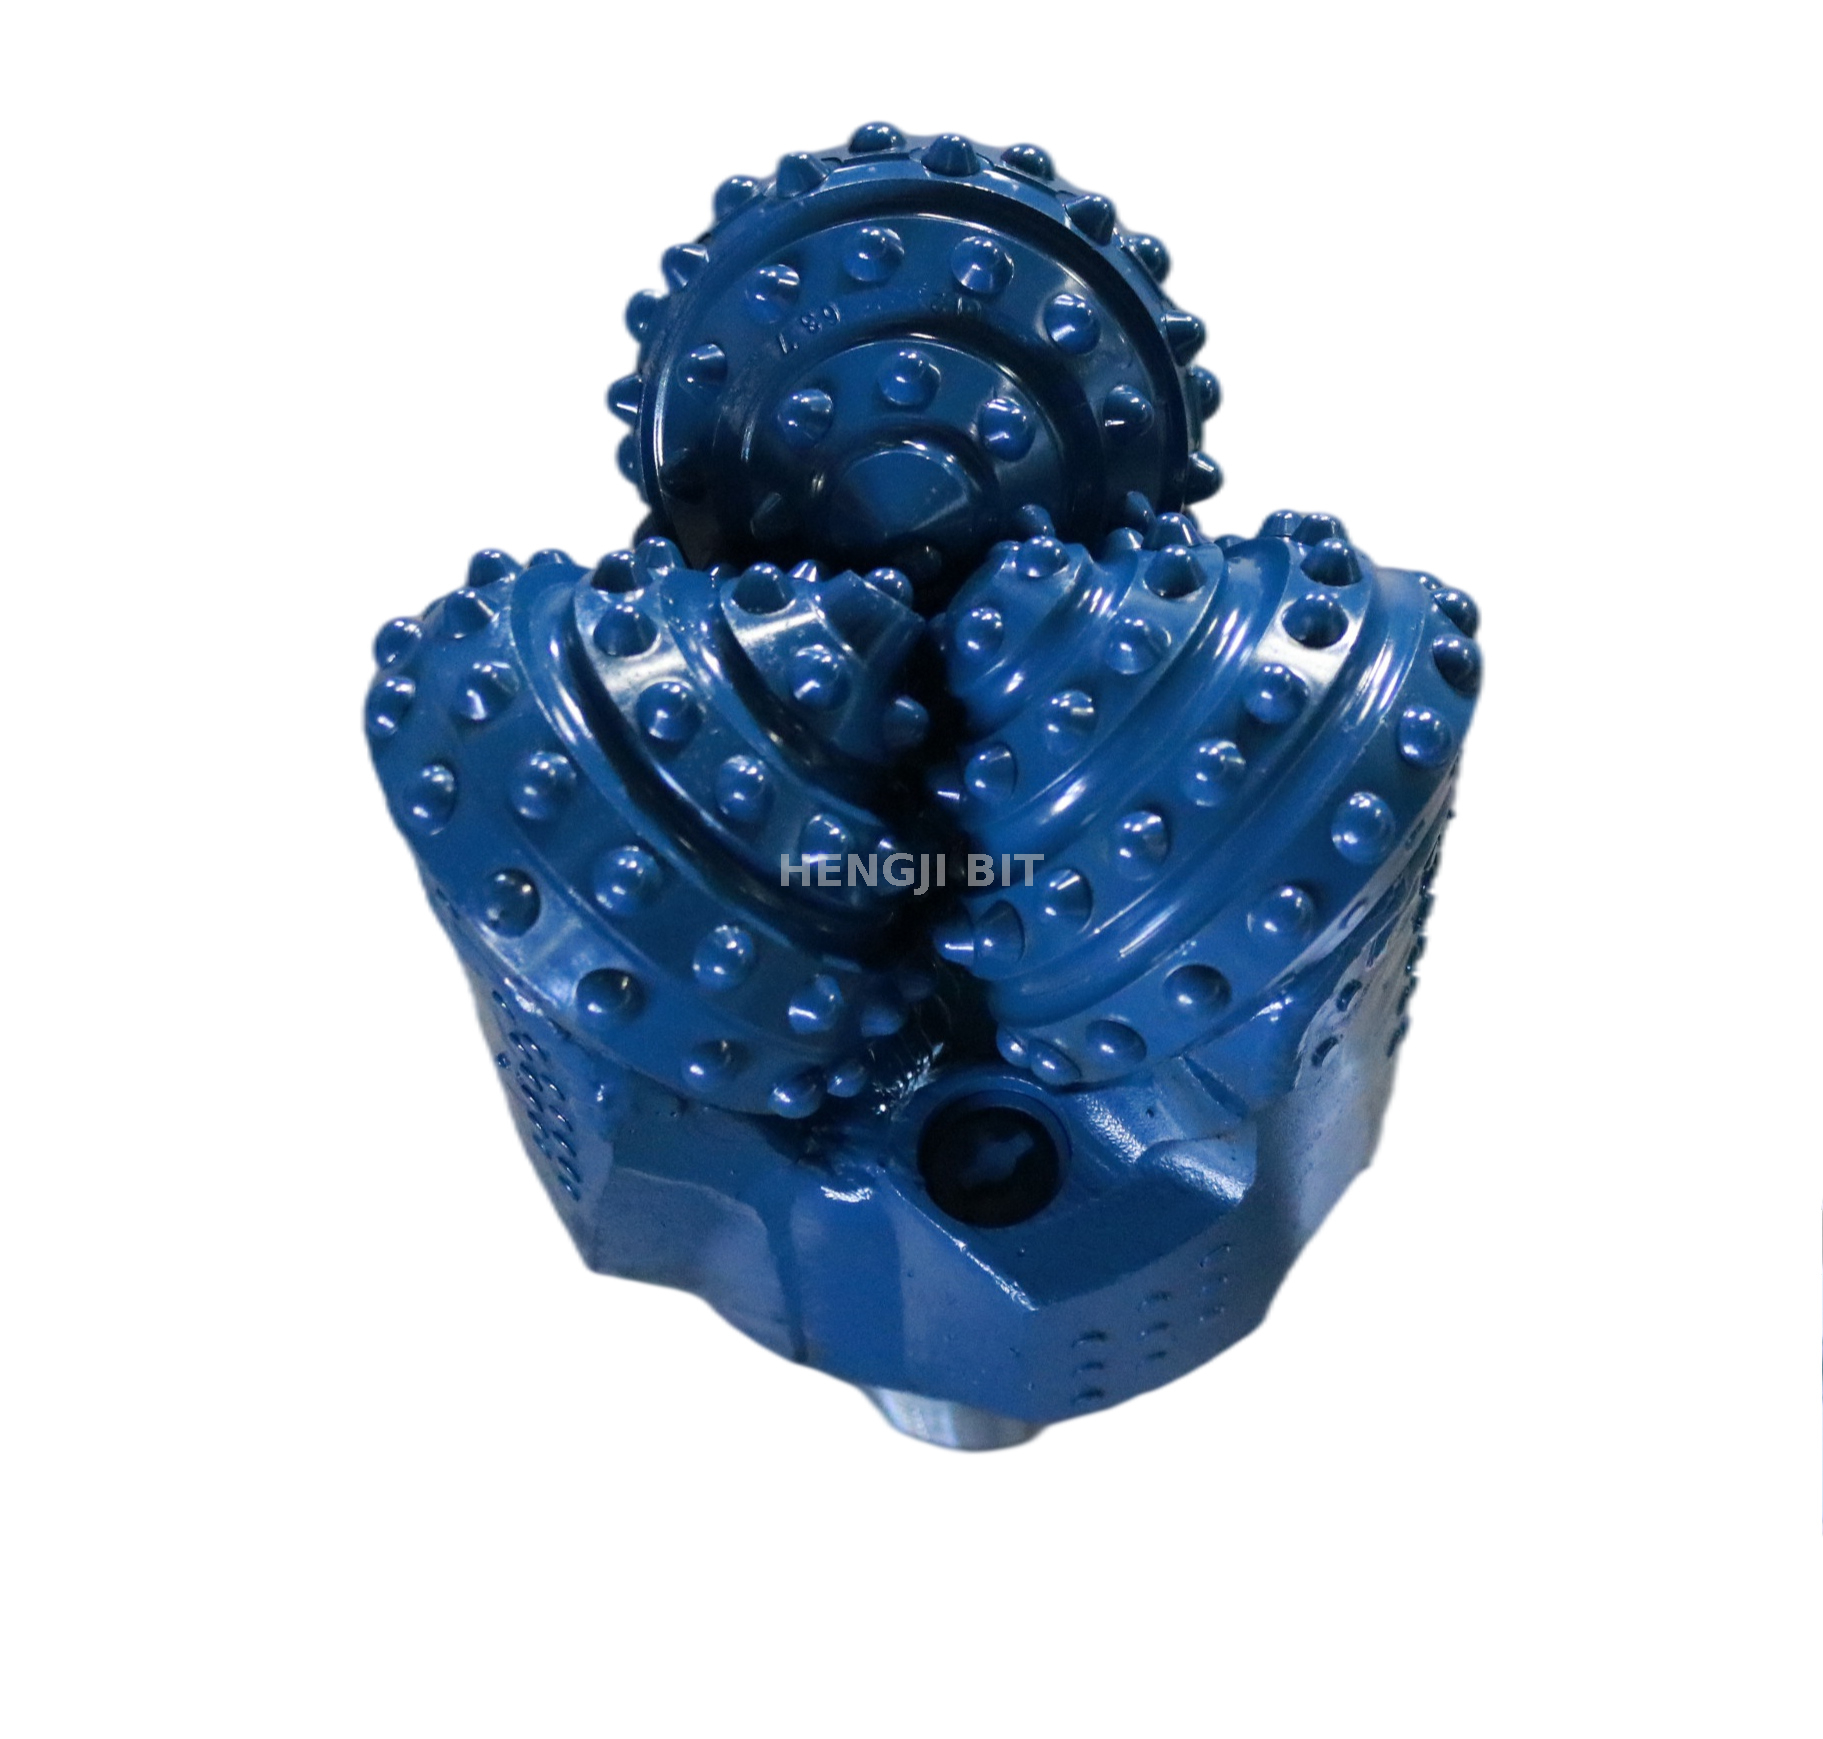 API 61/2" Iadc 617Y Tungsten Carbide Drill Rock Bit Tricone Rotary Bit for Well Drilling